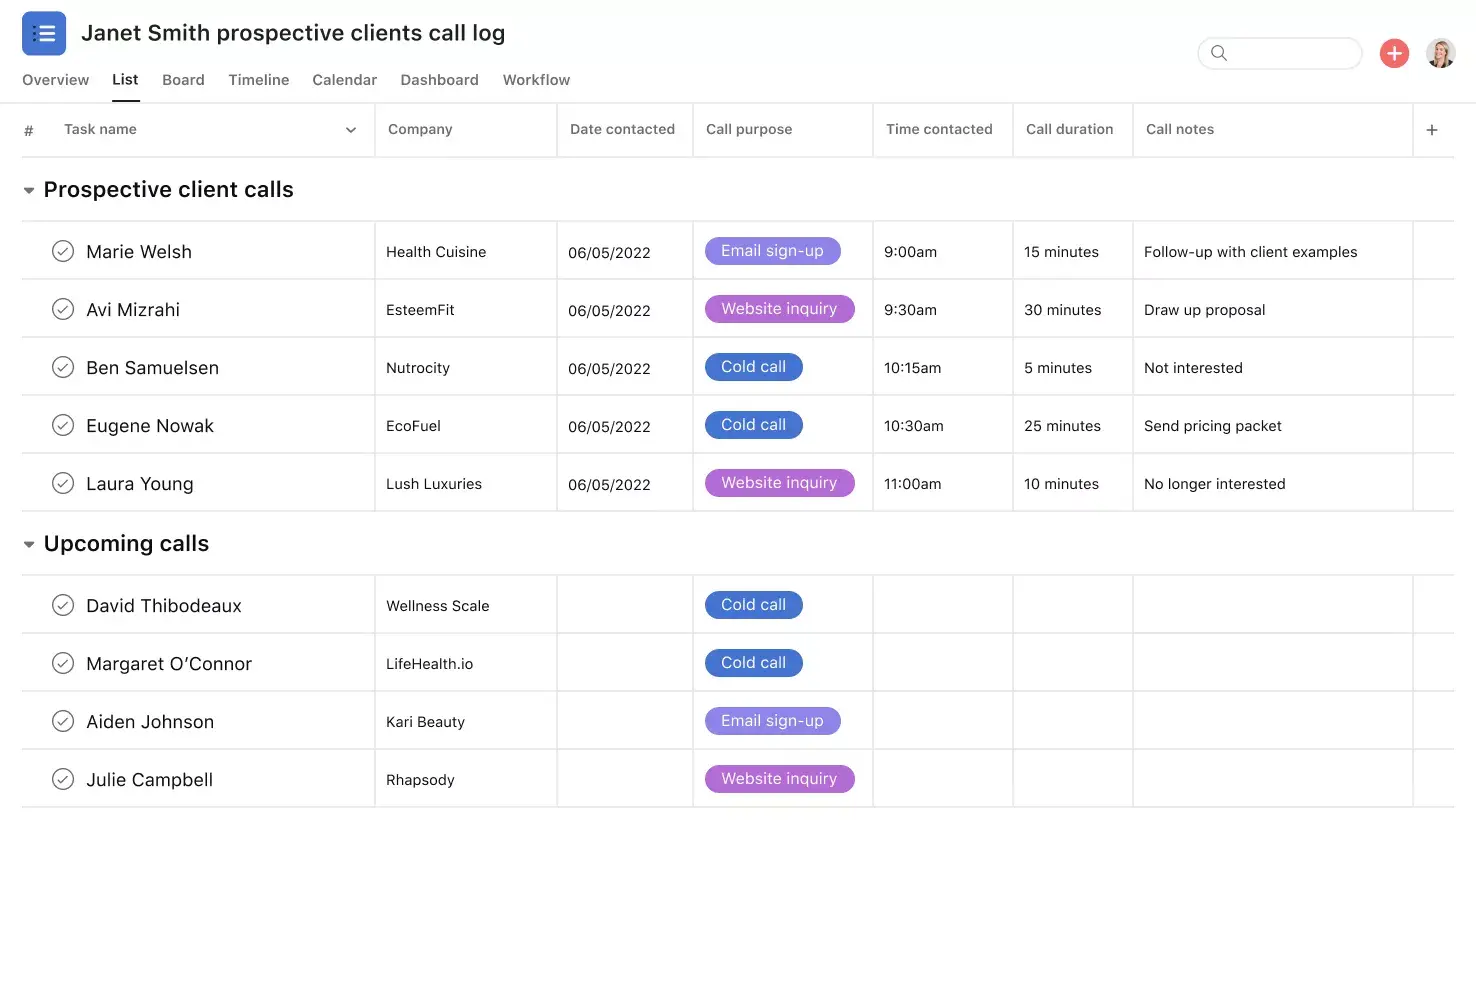 [Product ui] Call log project in Asana, spreadsheet-style project view (List)